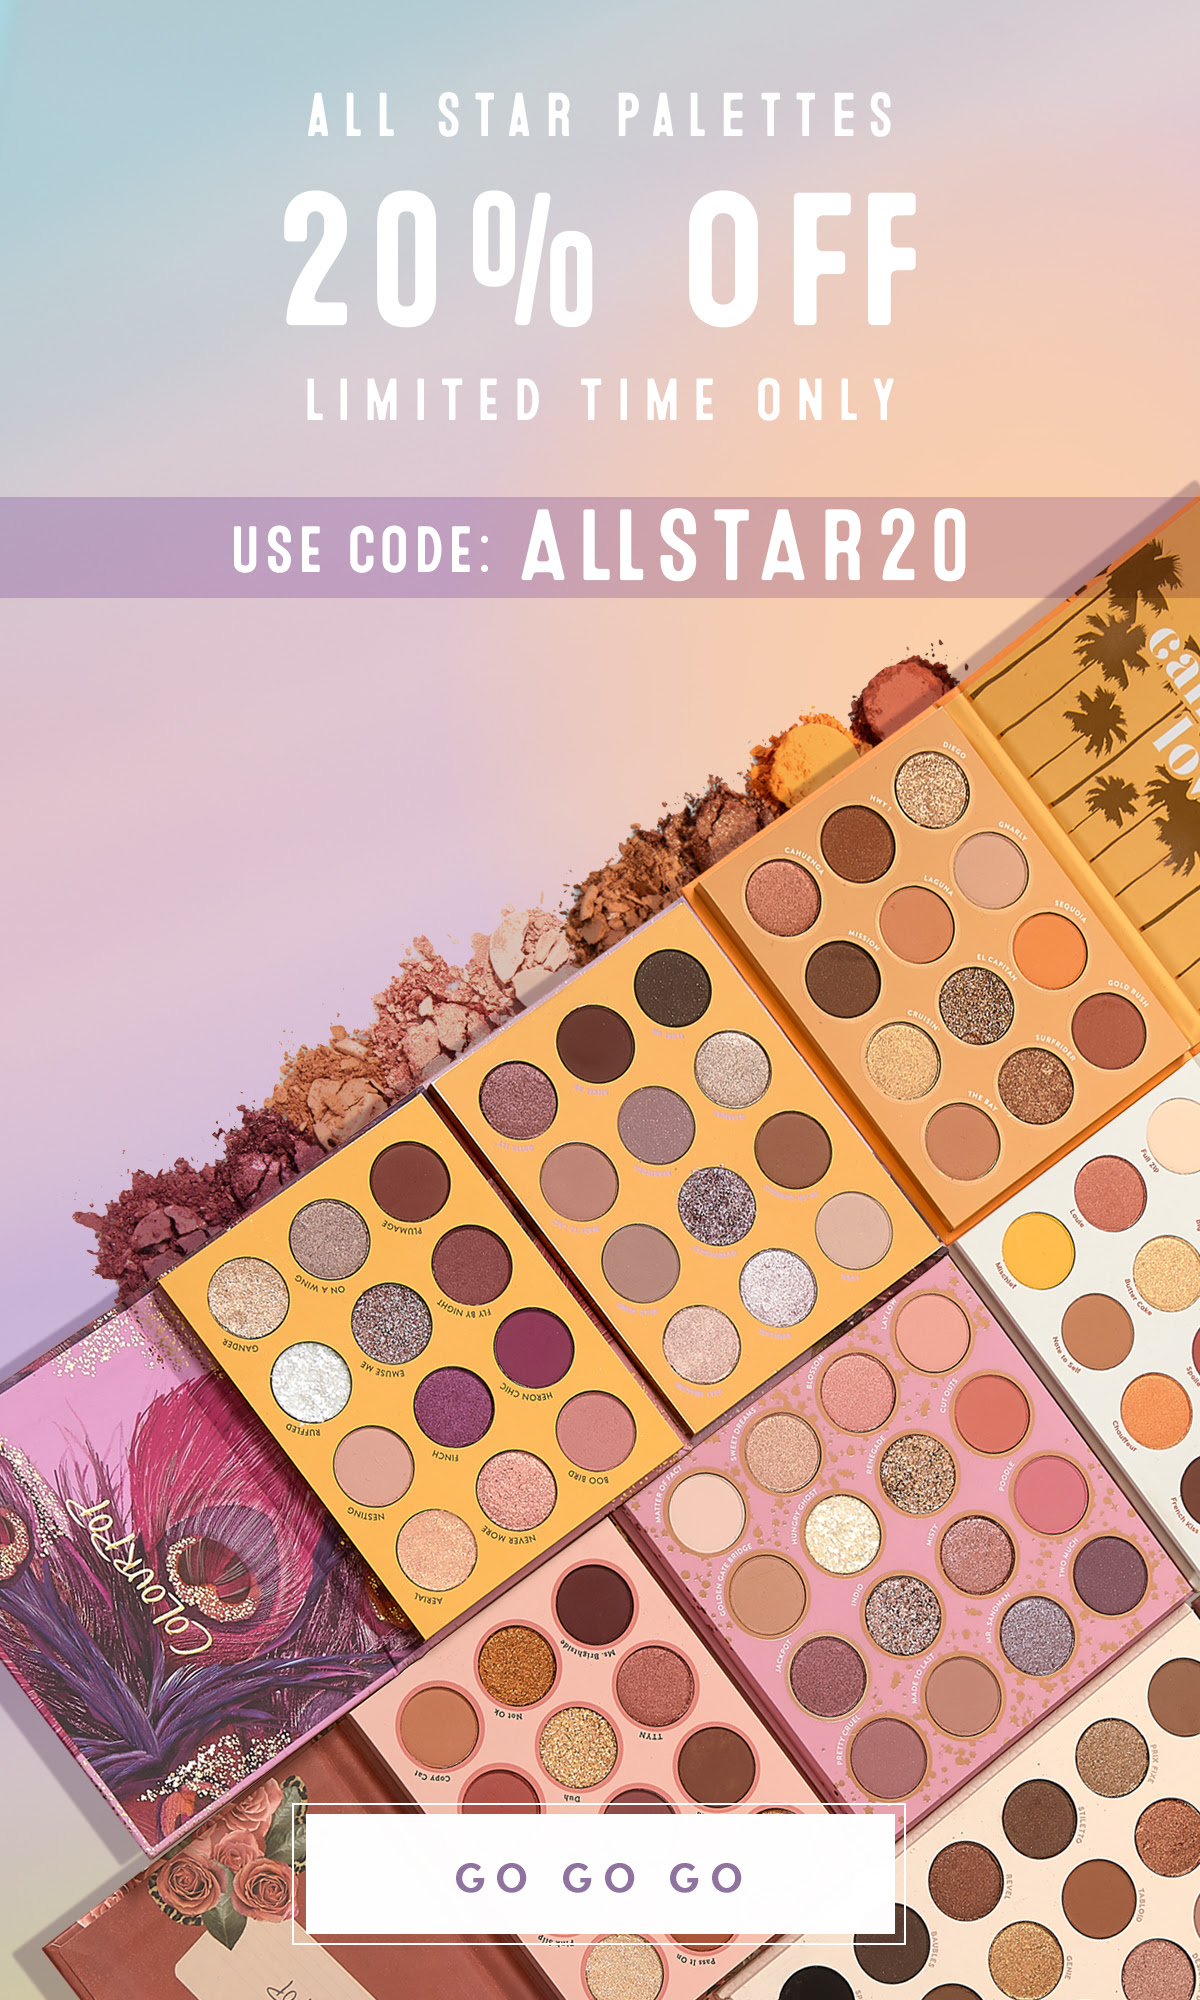 COLOURPOP COSMETICS CANADA 20 Off All Star Palettes 2020 Canadian